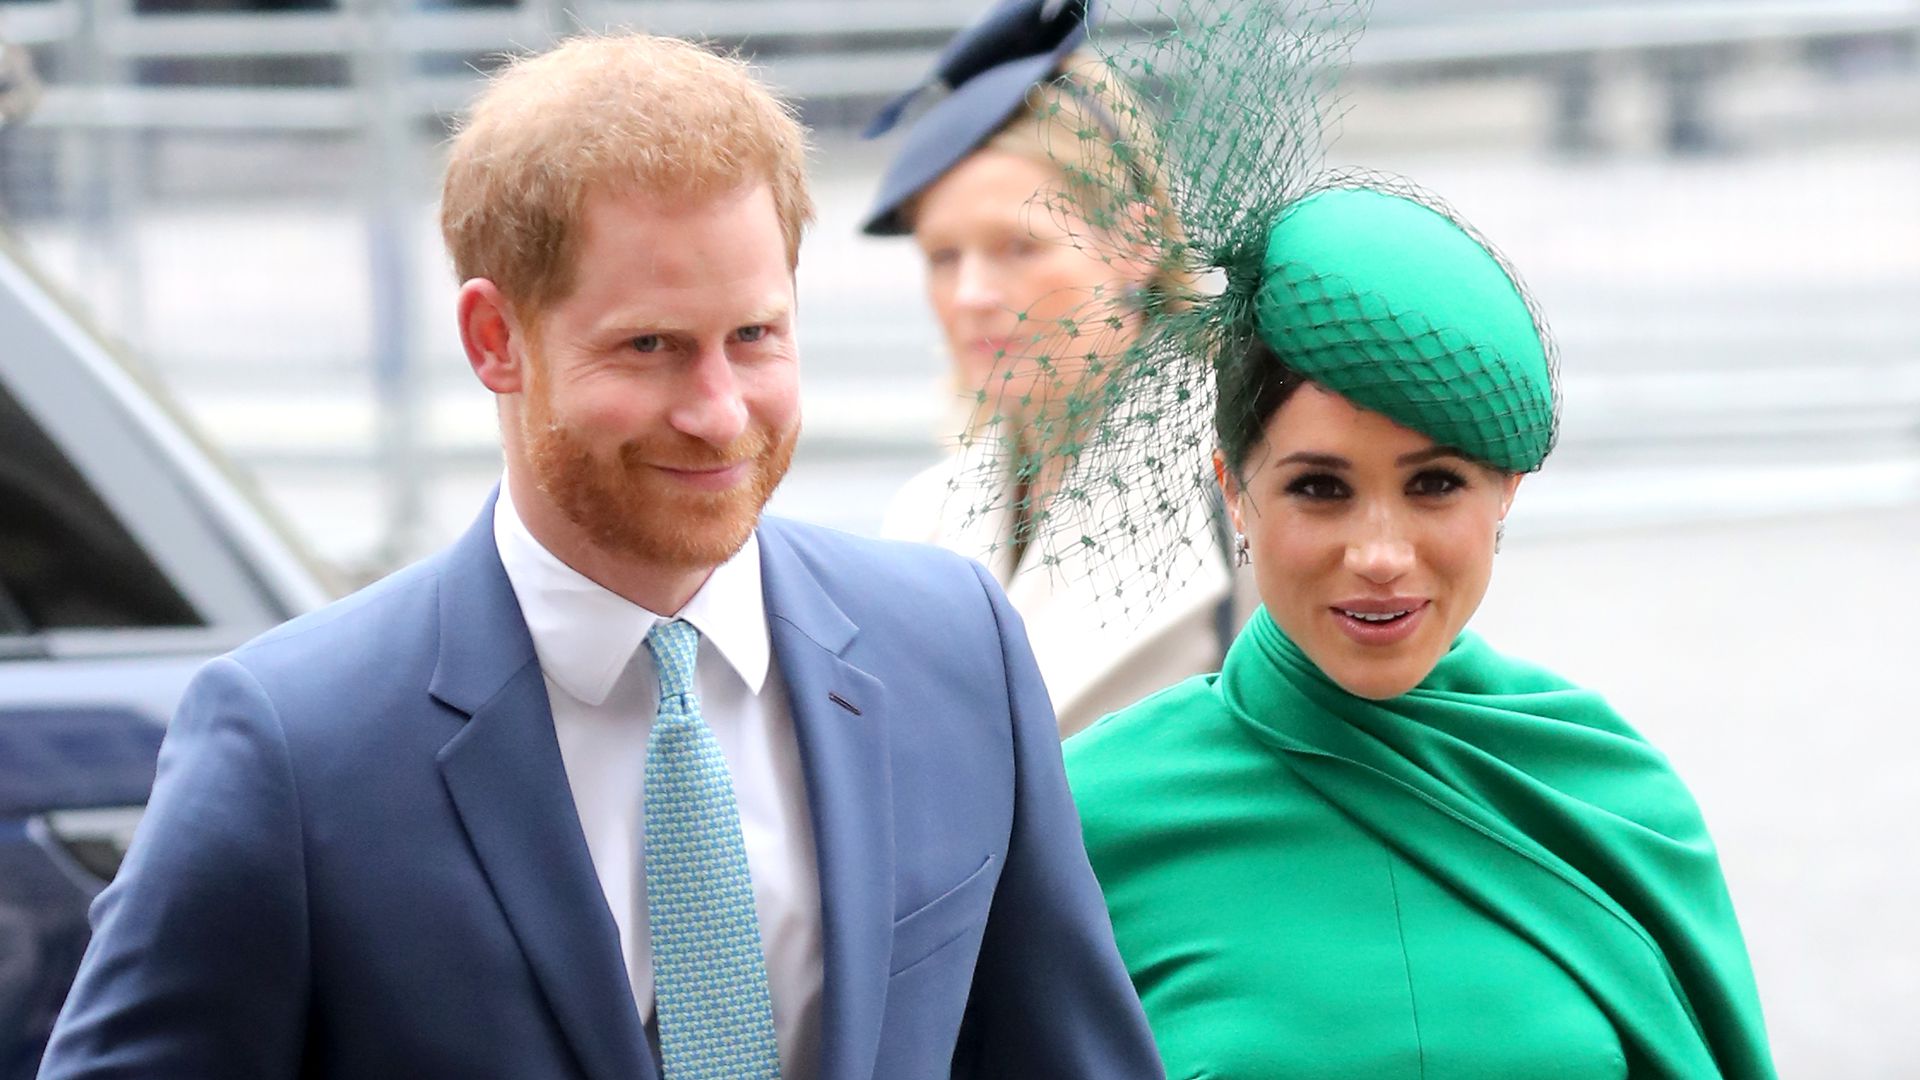 Without a private plane: Prince Harry and Meghan arrived in London